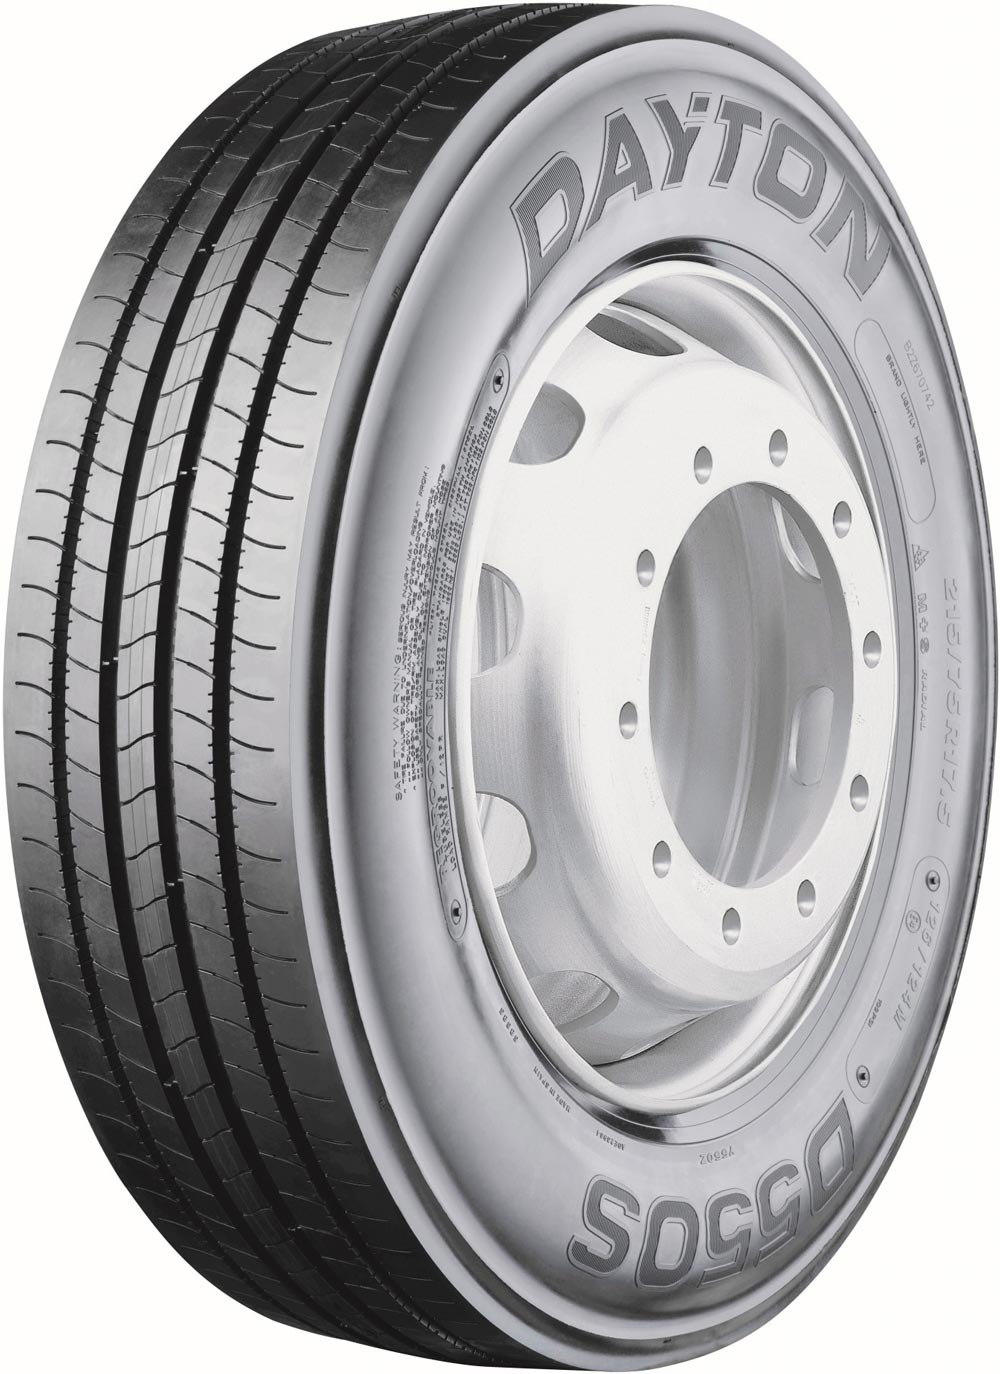 product_type-heavy_tires DAYTON D550S 225/75 R17.5 M